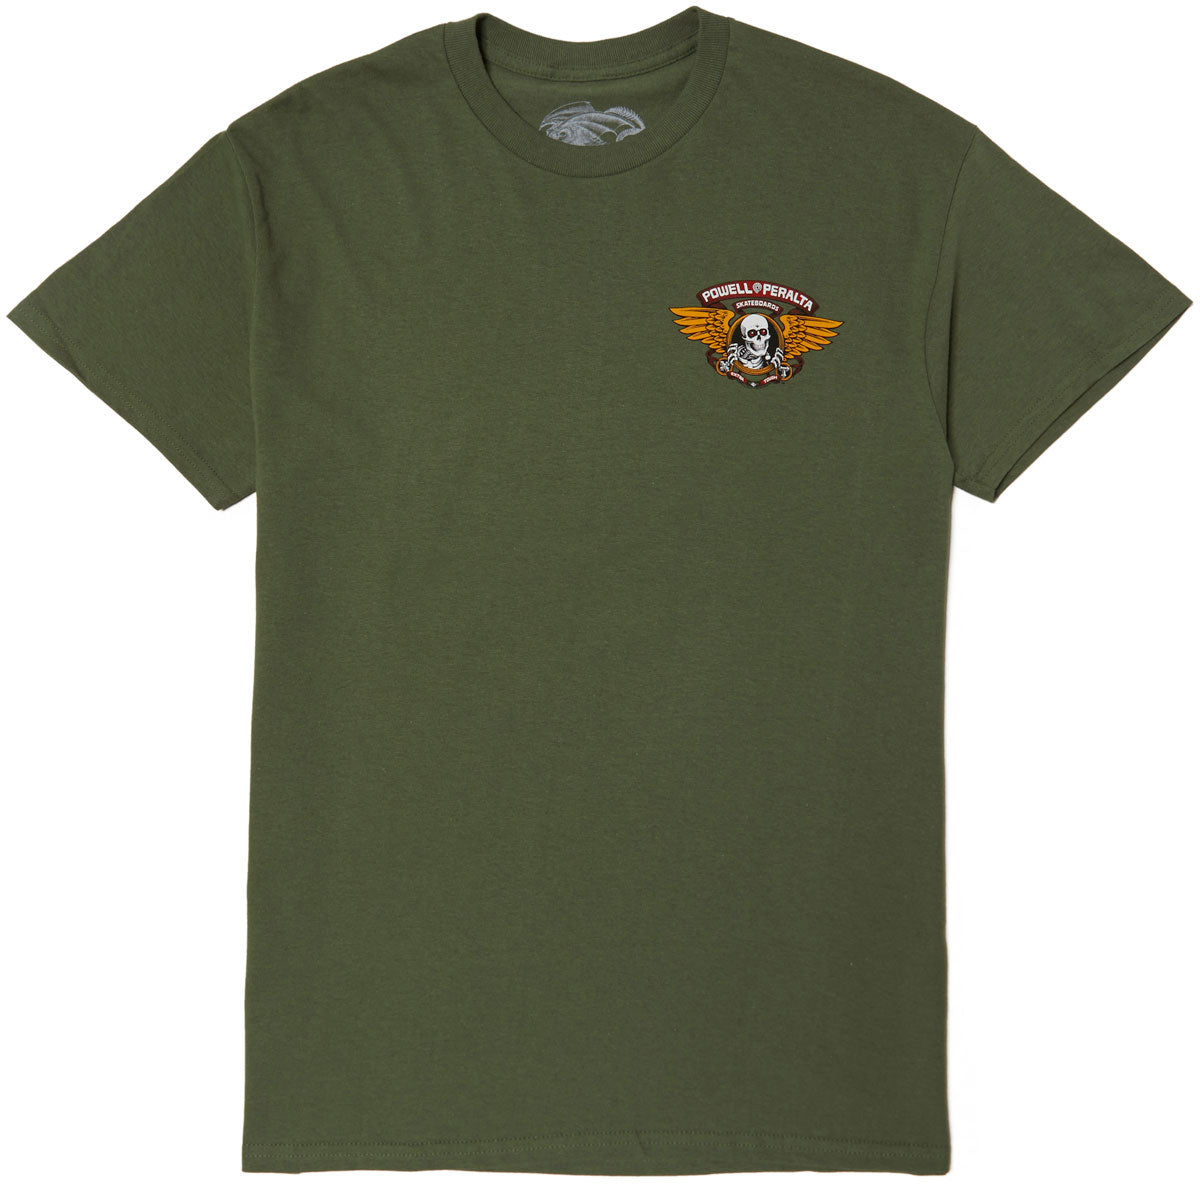 Powell-Peralta Winged Ripper T-Shirt - Military Green 2 image 2